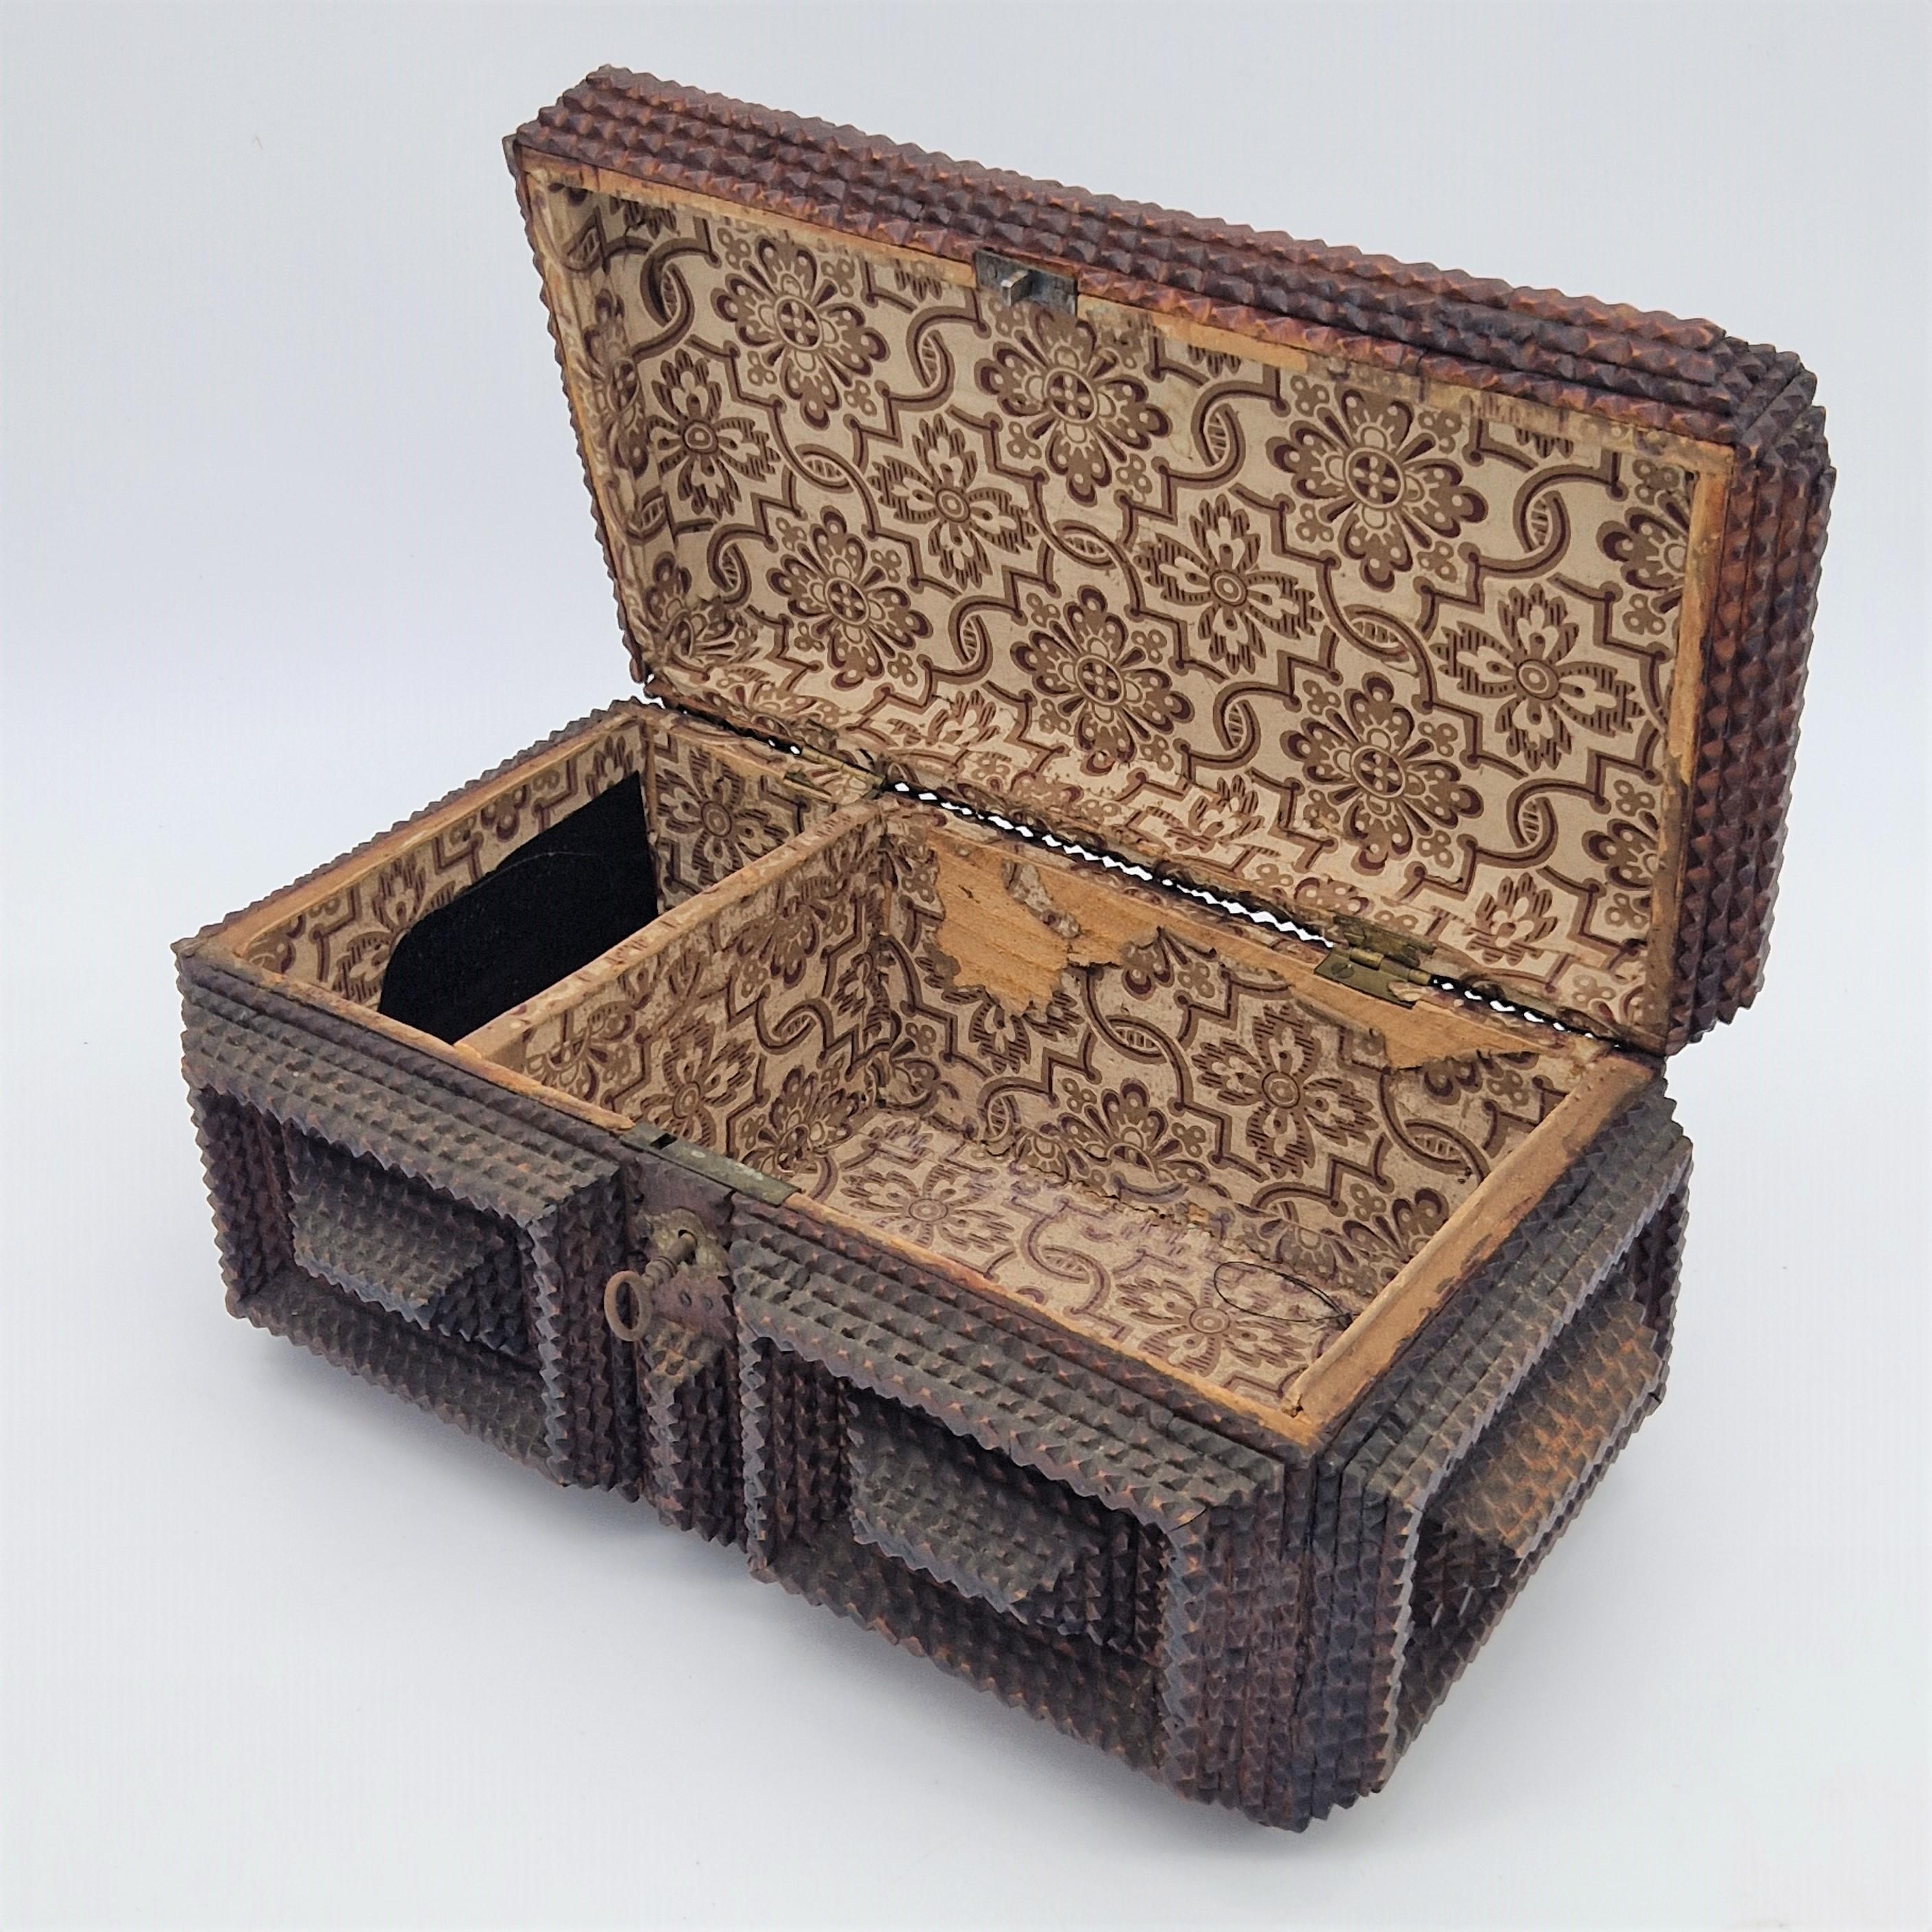 Hand-Crafted Tramp Art Wood Box. 1850 - 1880 For Sale